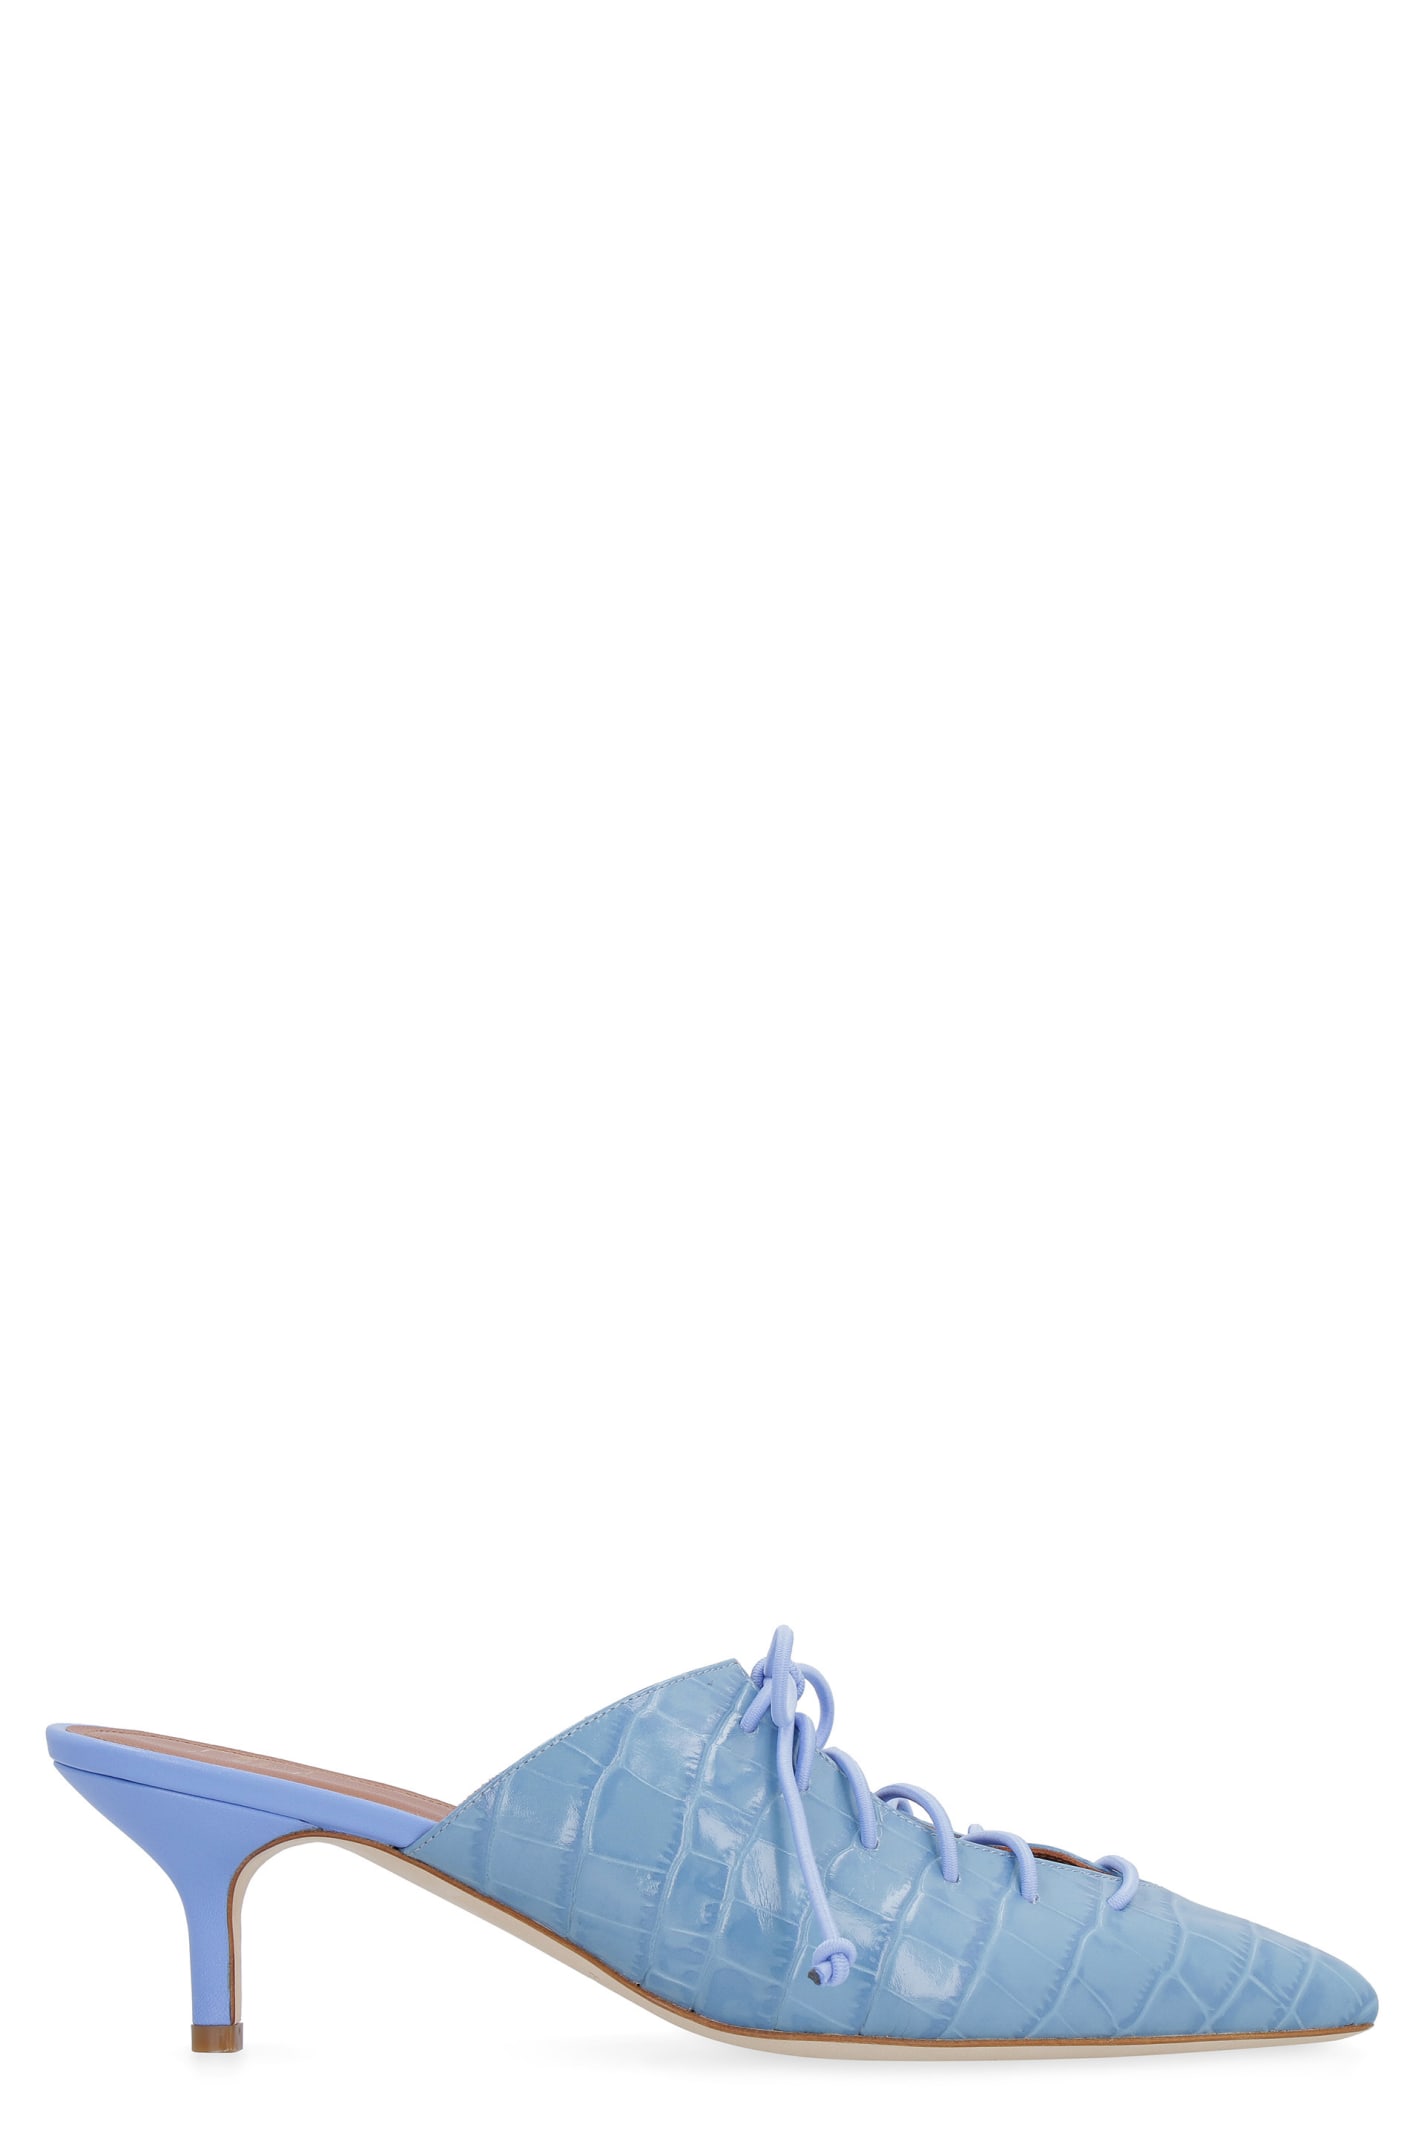 Malone Souliers Annie Leather Mules In Blue